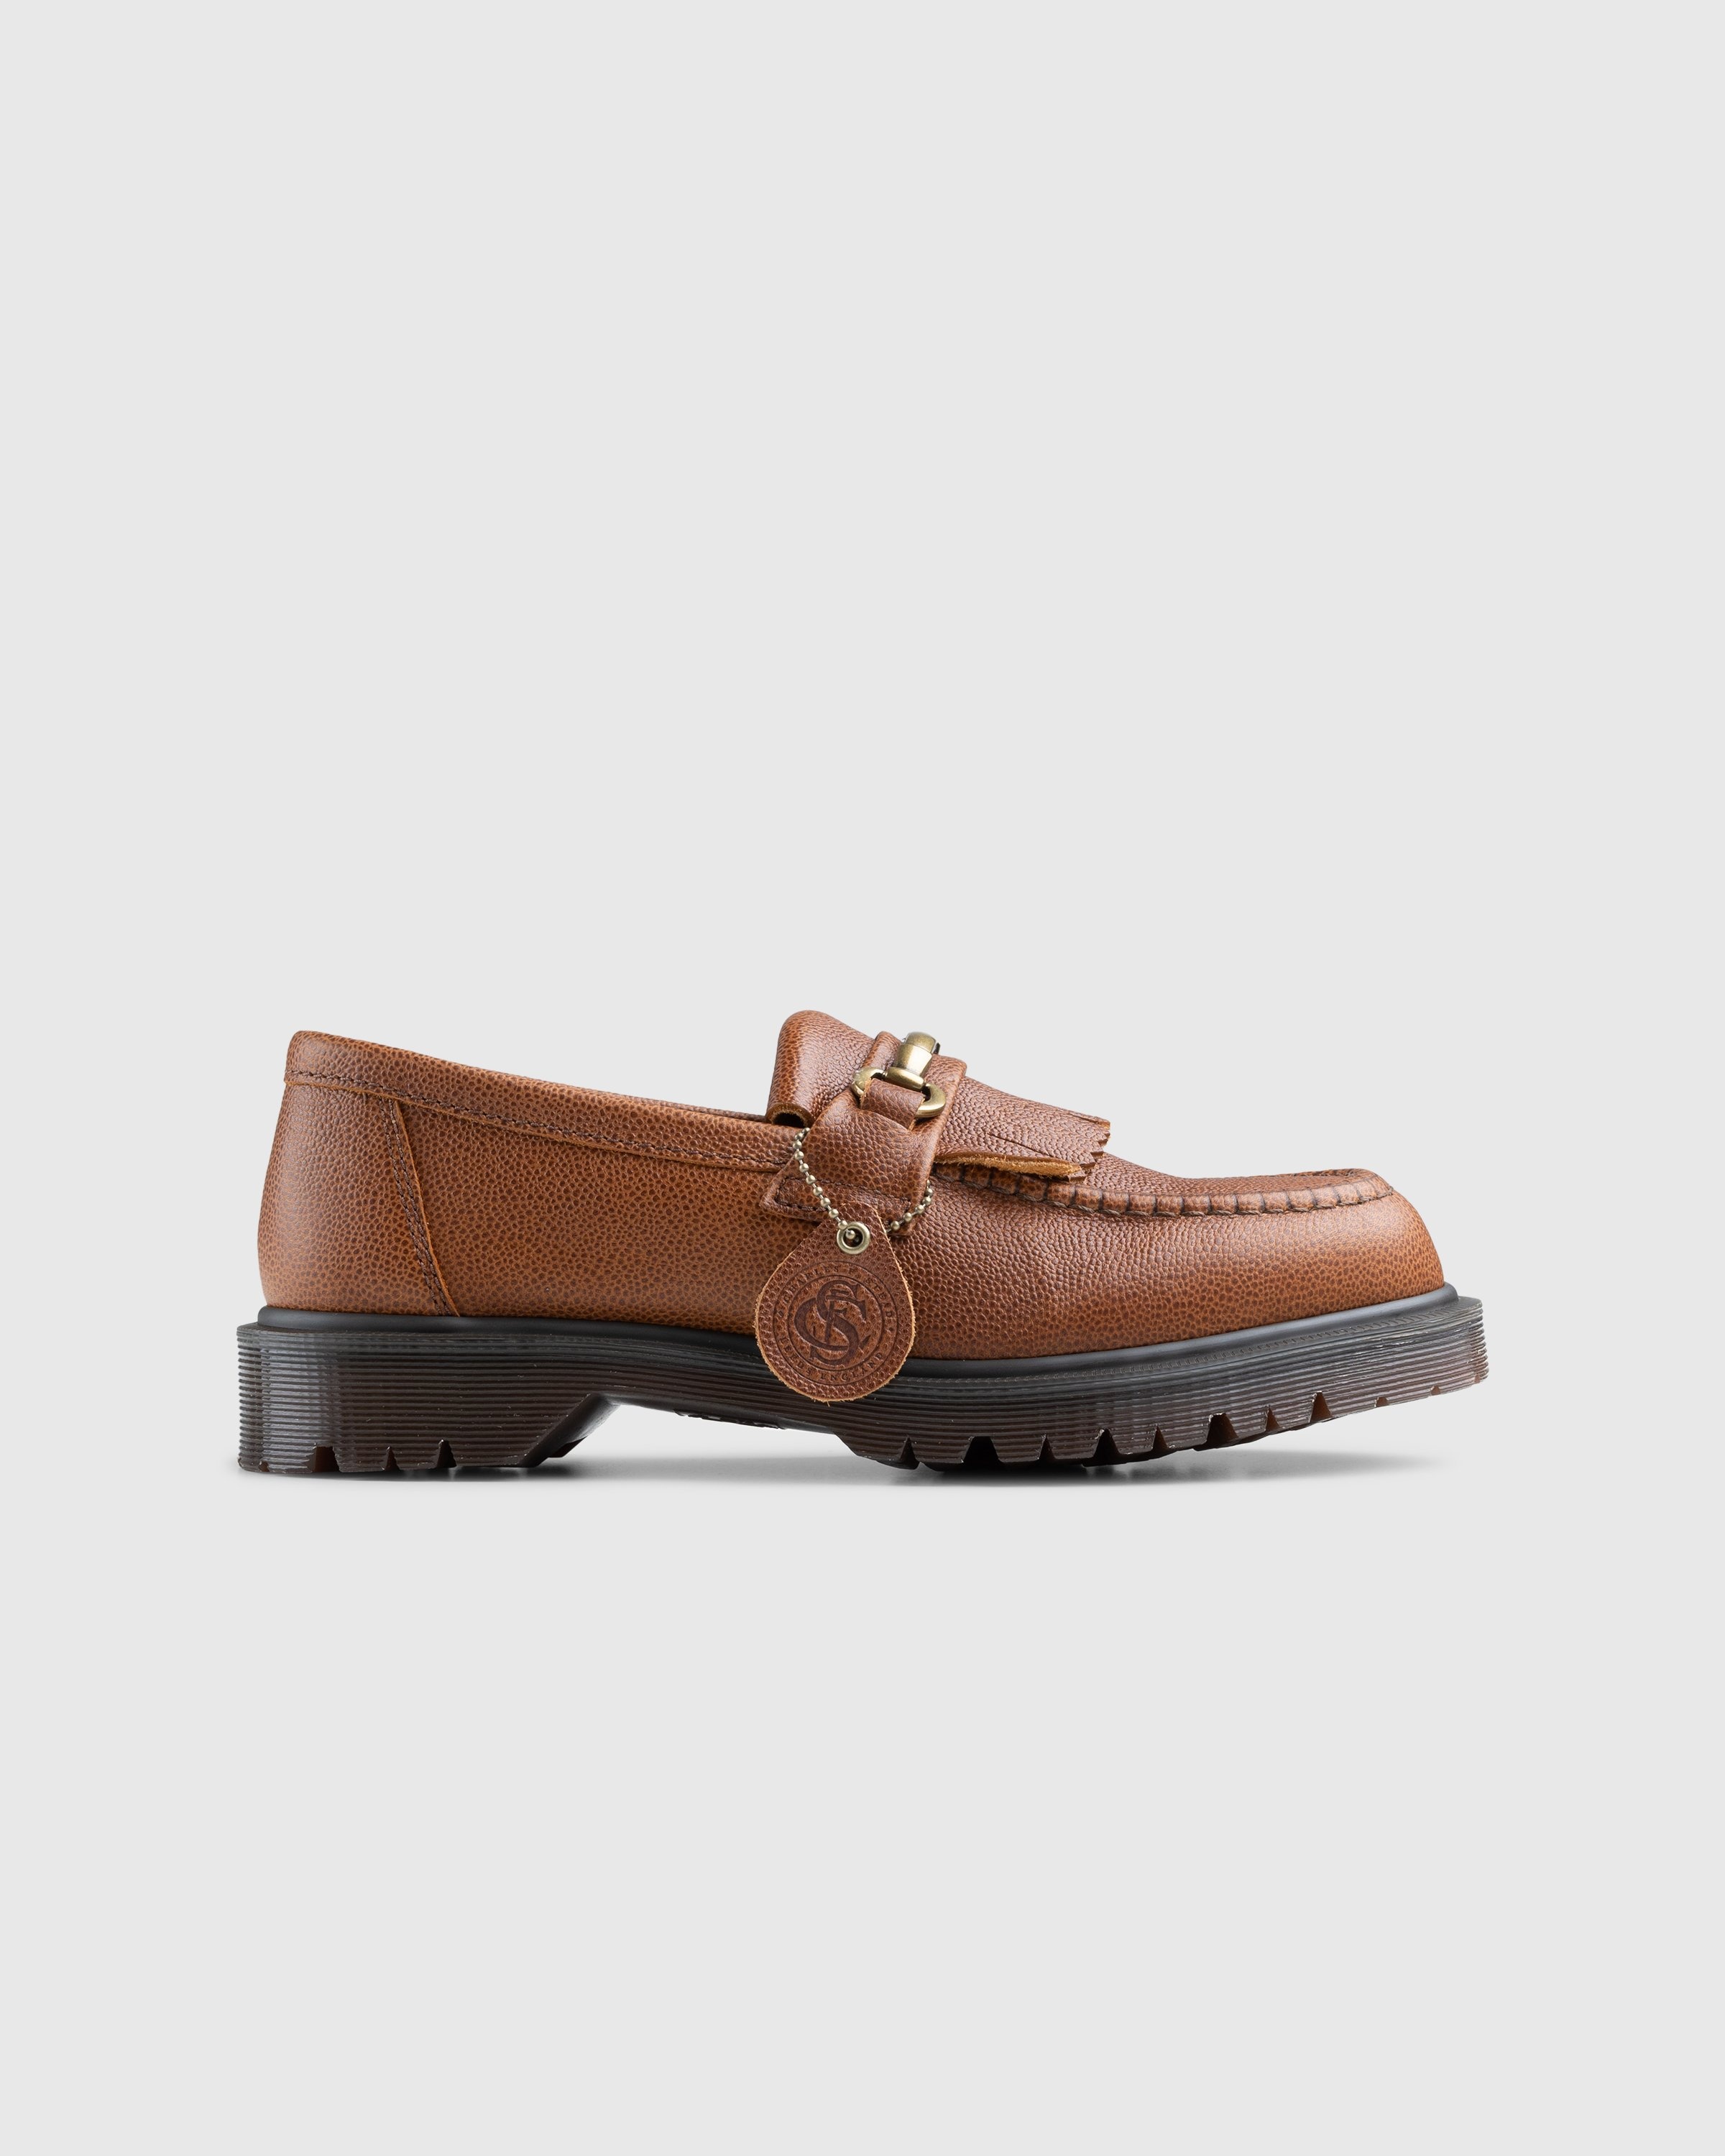 Dr. Martens – Adrian Snaffle Westminster Brown - Shoes - Brown - Image 1